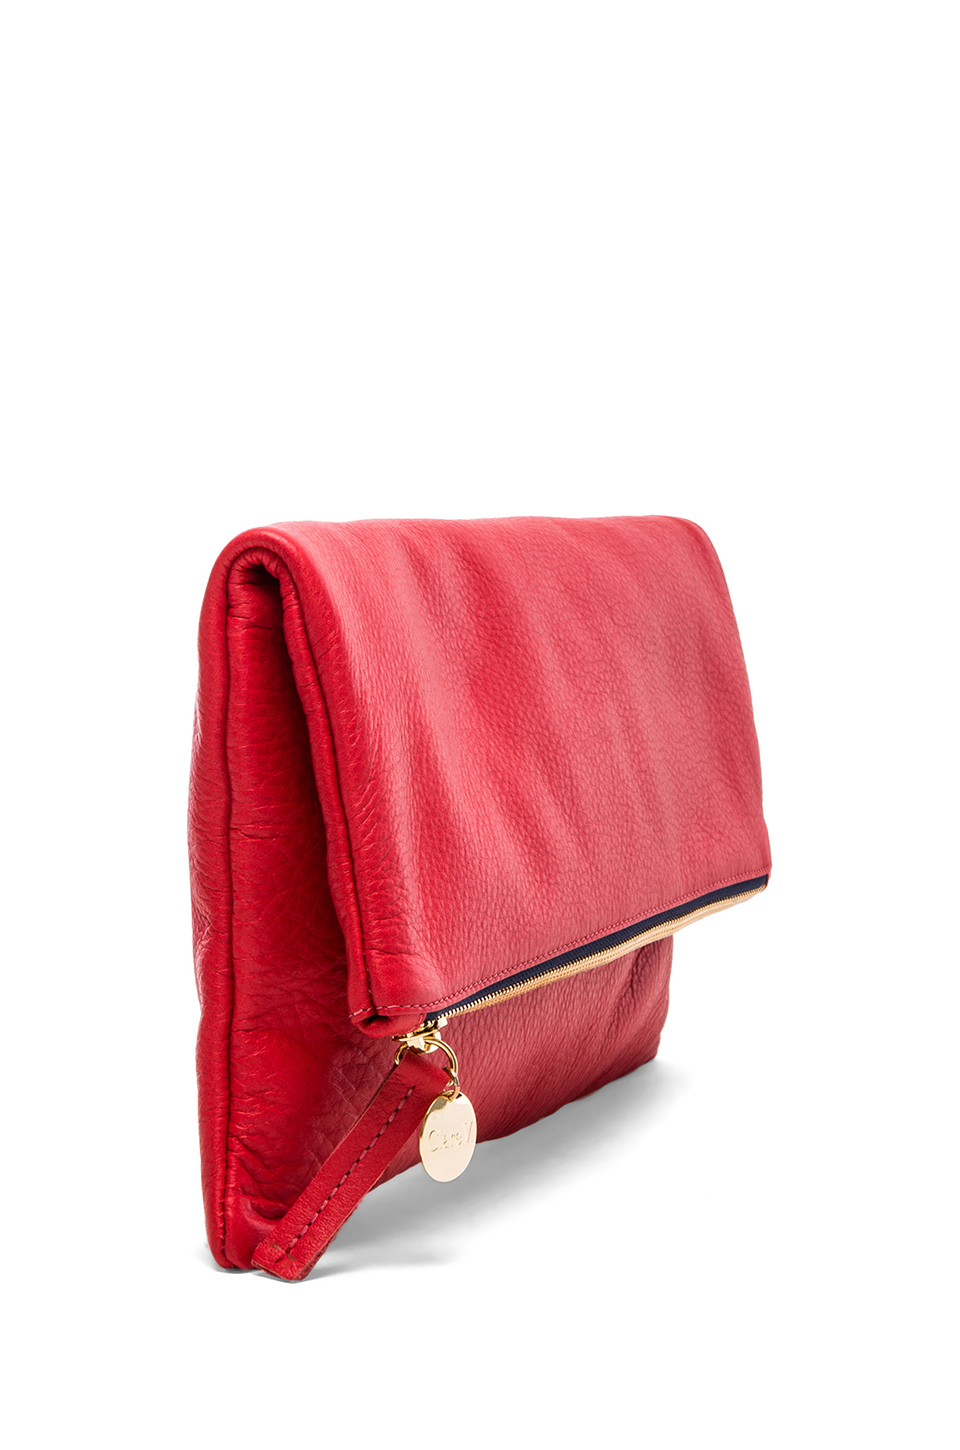 Clare V. Foldover Clutch in Red - Lyst